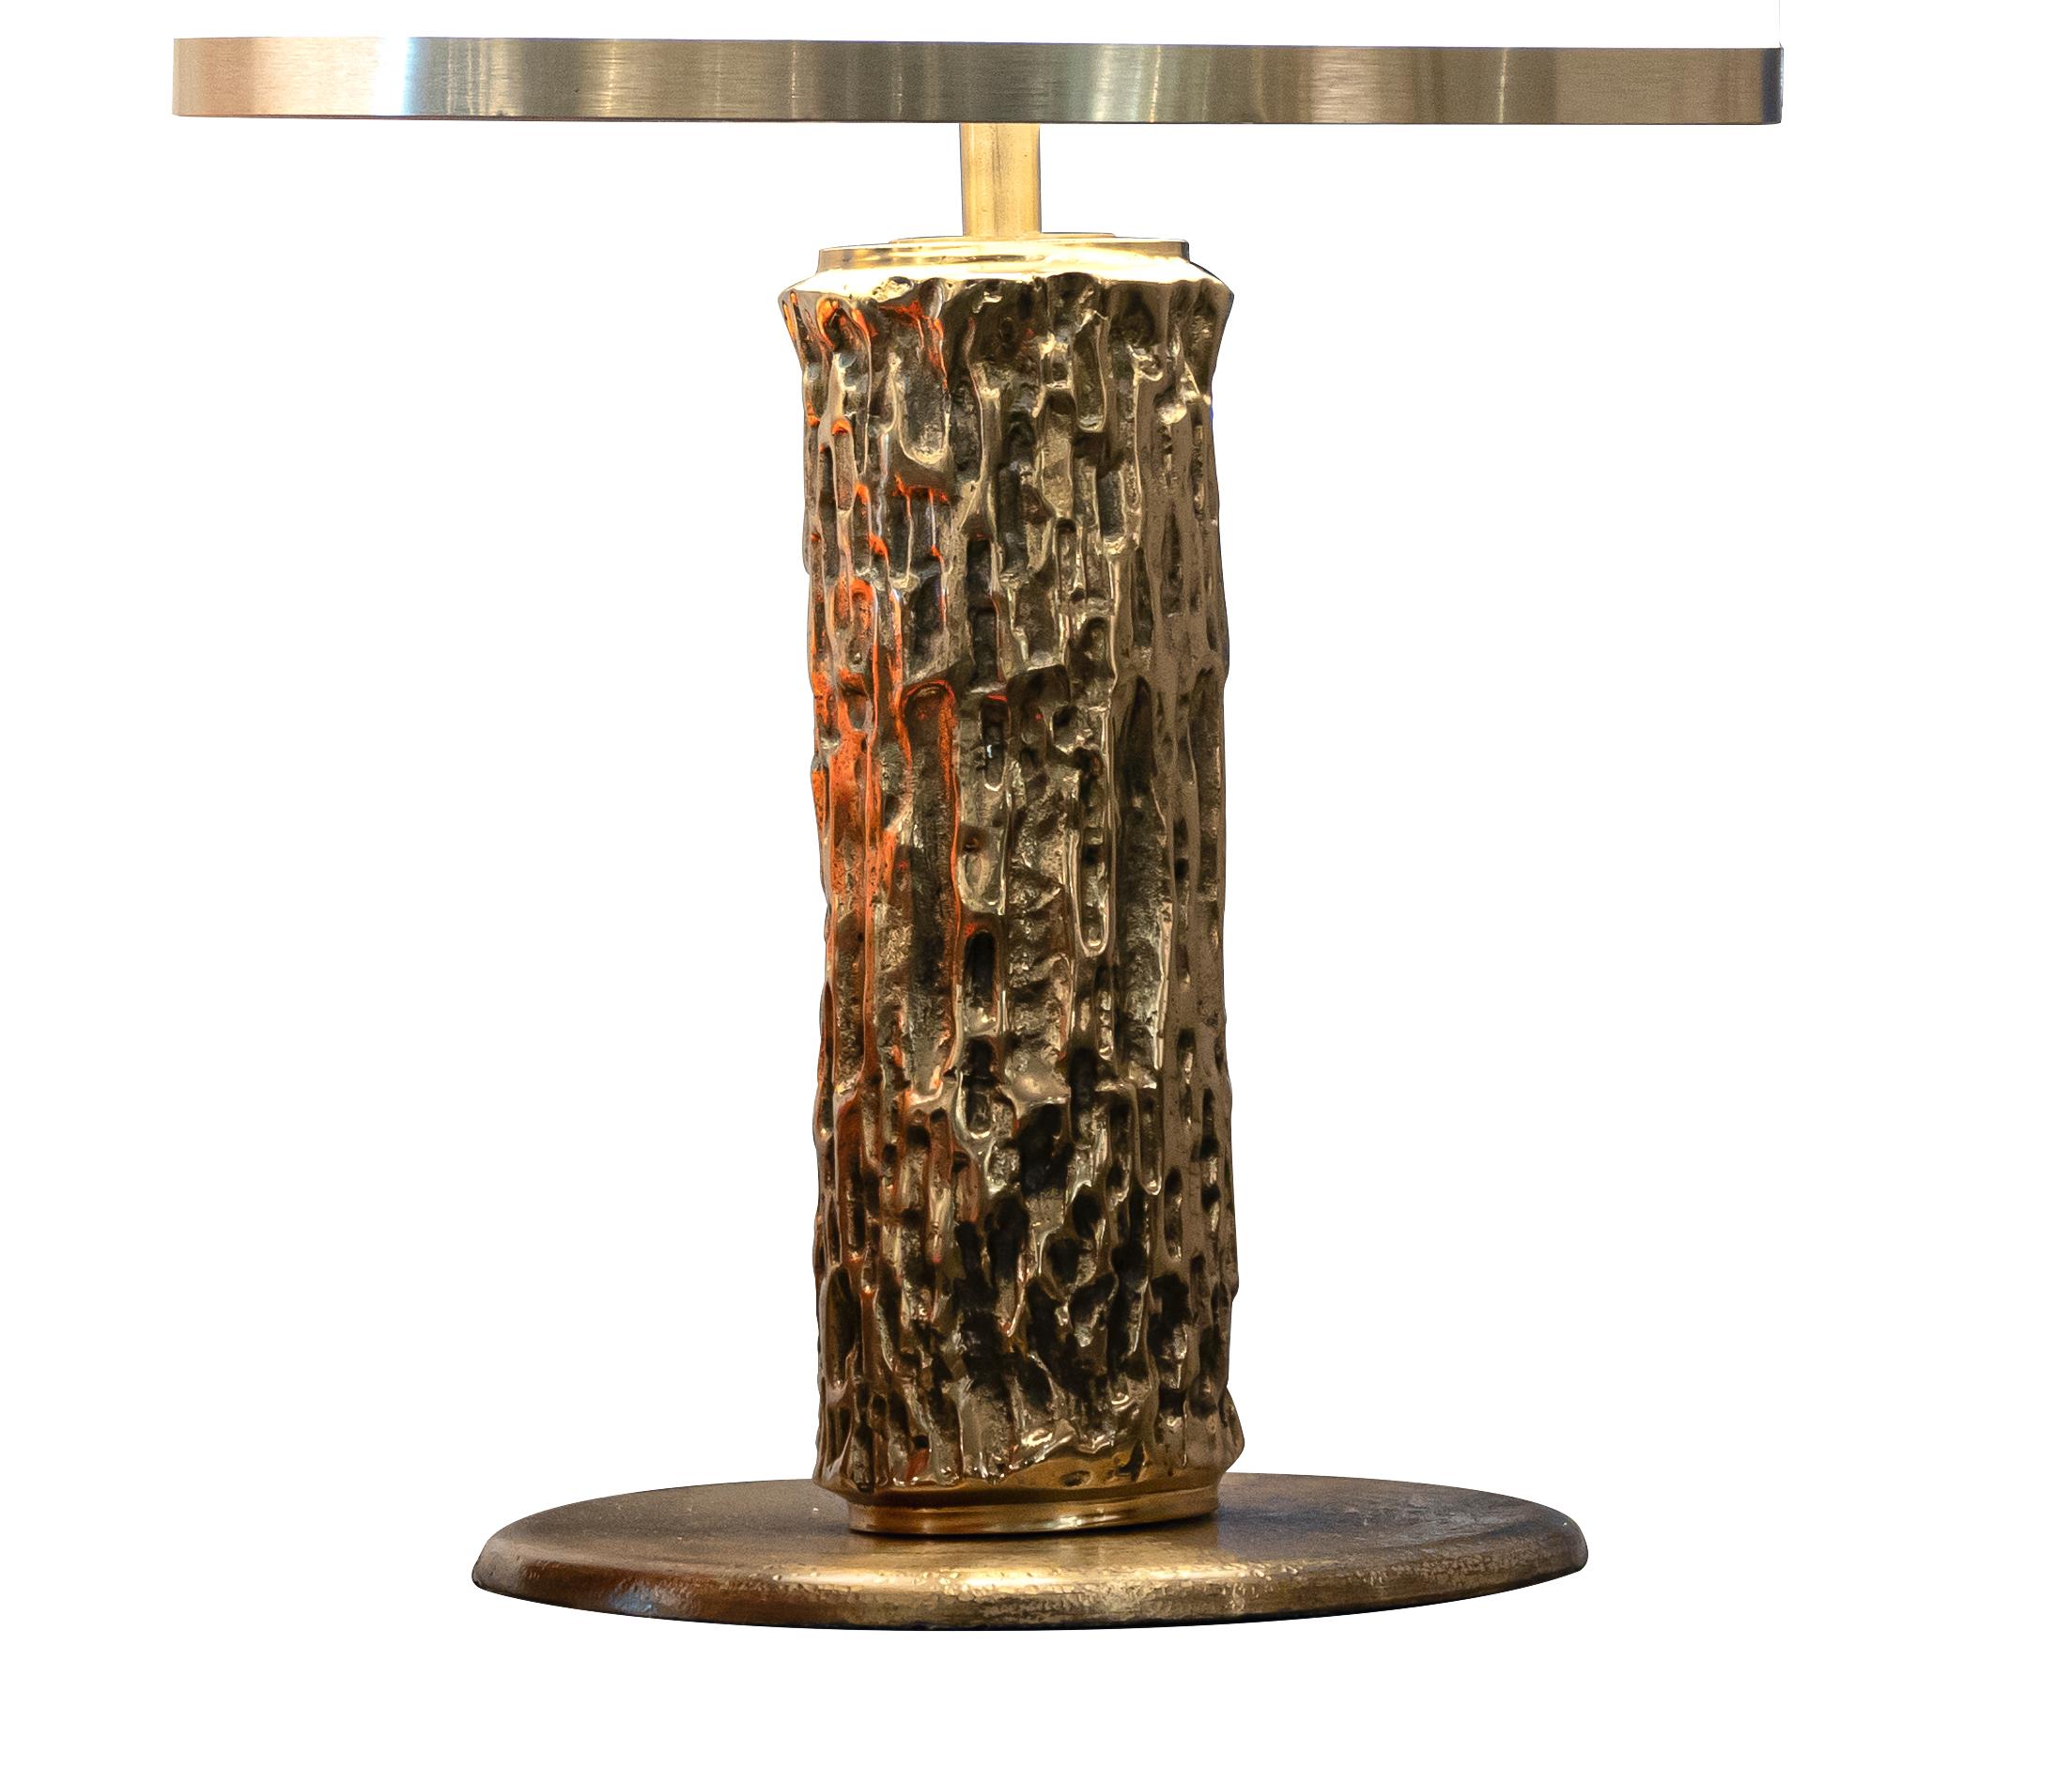 Vintage Table Lamp is an original Design Lamp realized and created in the 1970s by the Italian designer Luciano Frigerio (Desio, 1928-Sanremo, 1999).

Brass. Total dimensions: 63 x 8 x 8 cm. 

Made in Italy. 

Mint Conditions.

Luciano